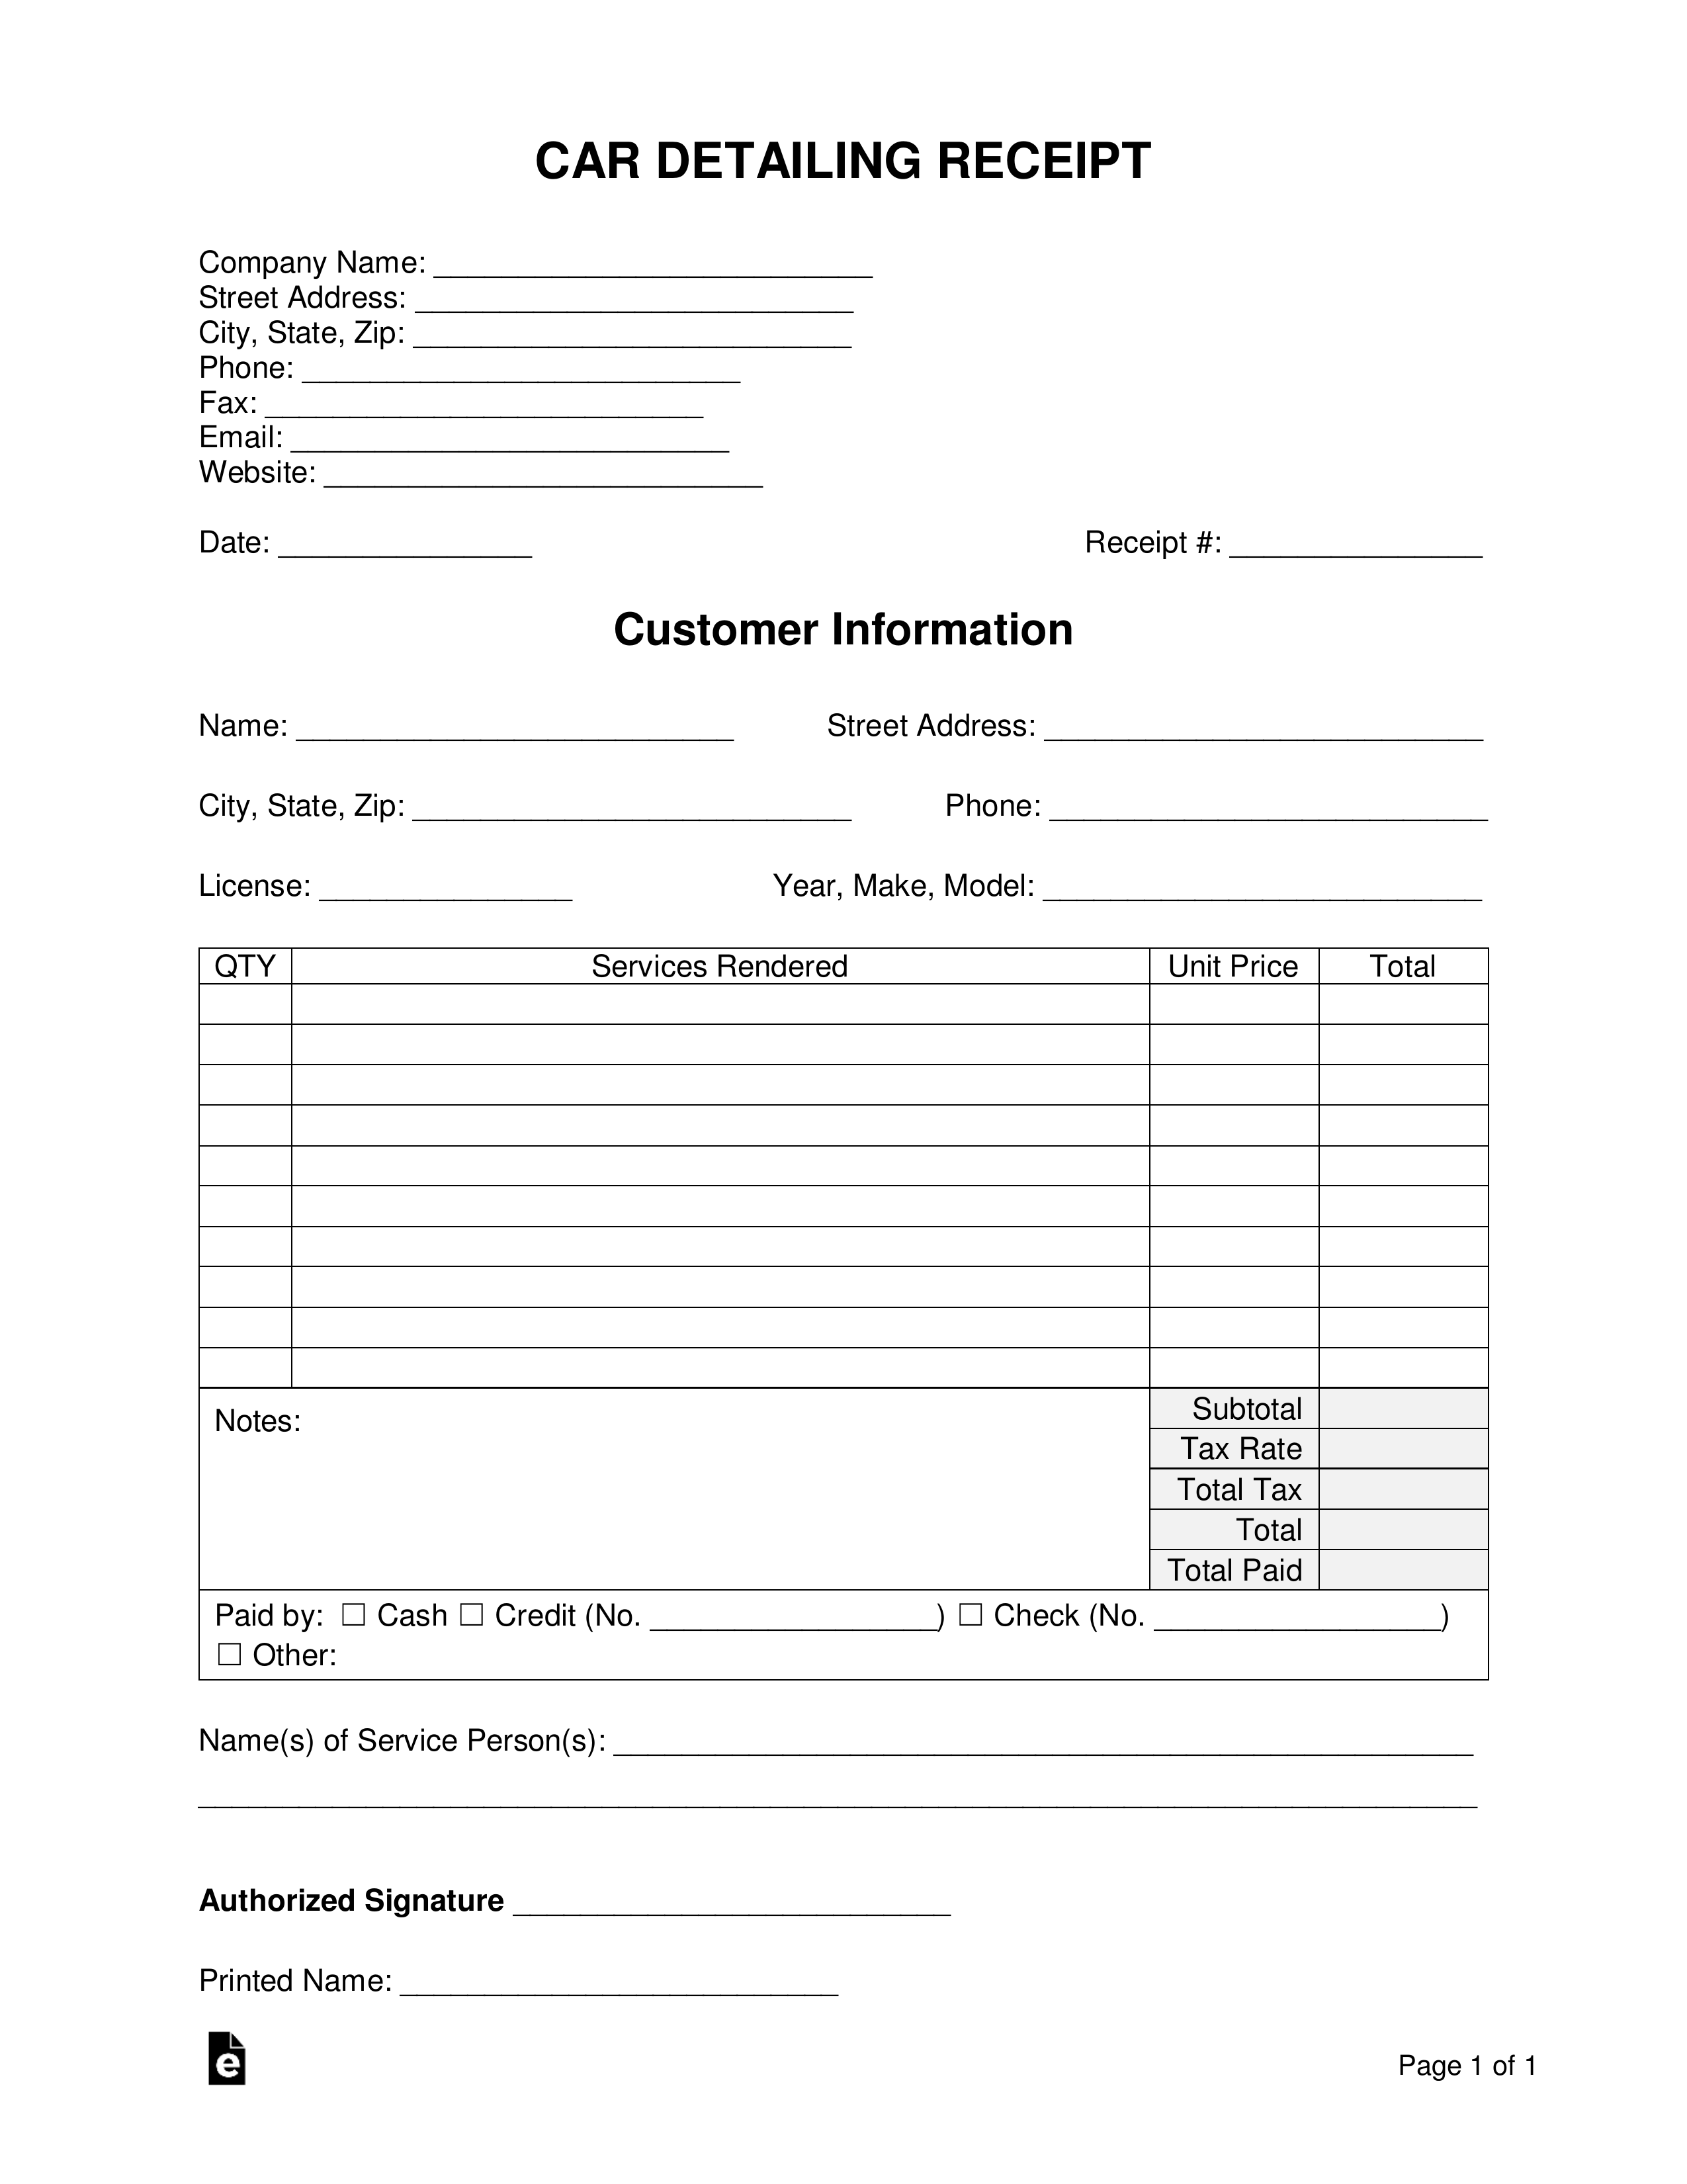 Free Car Detailing Receipt Template - PDF  Word – eForms With Regard To Auto Detailing Checklist Template Pertaining To Auto Detailing Checklist Template